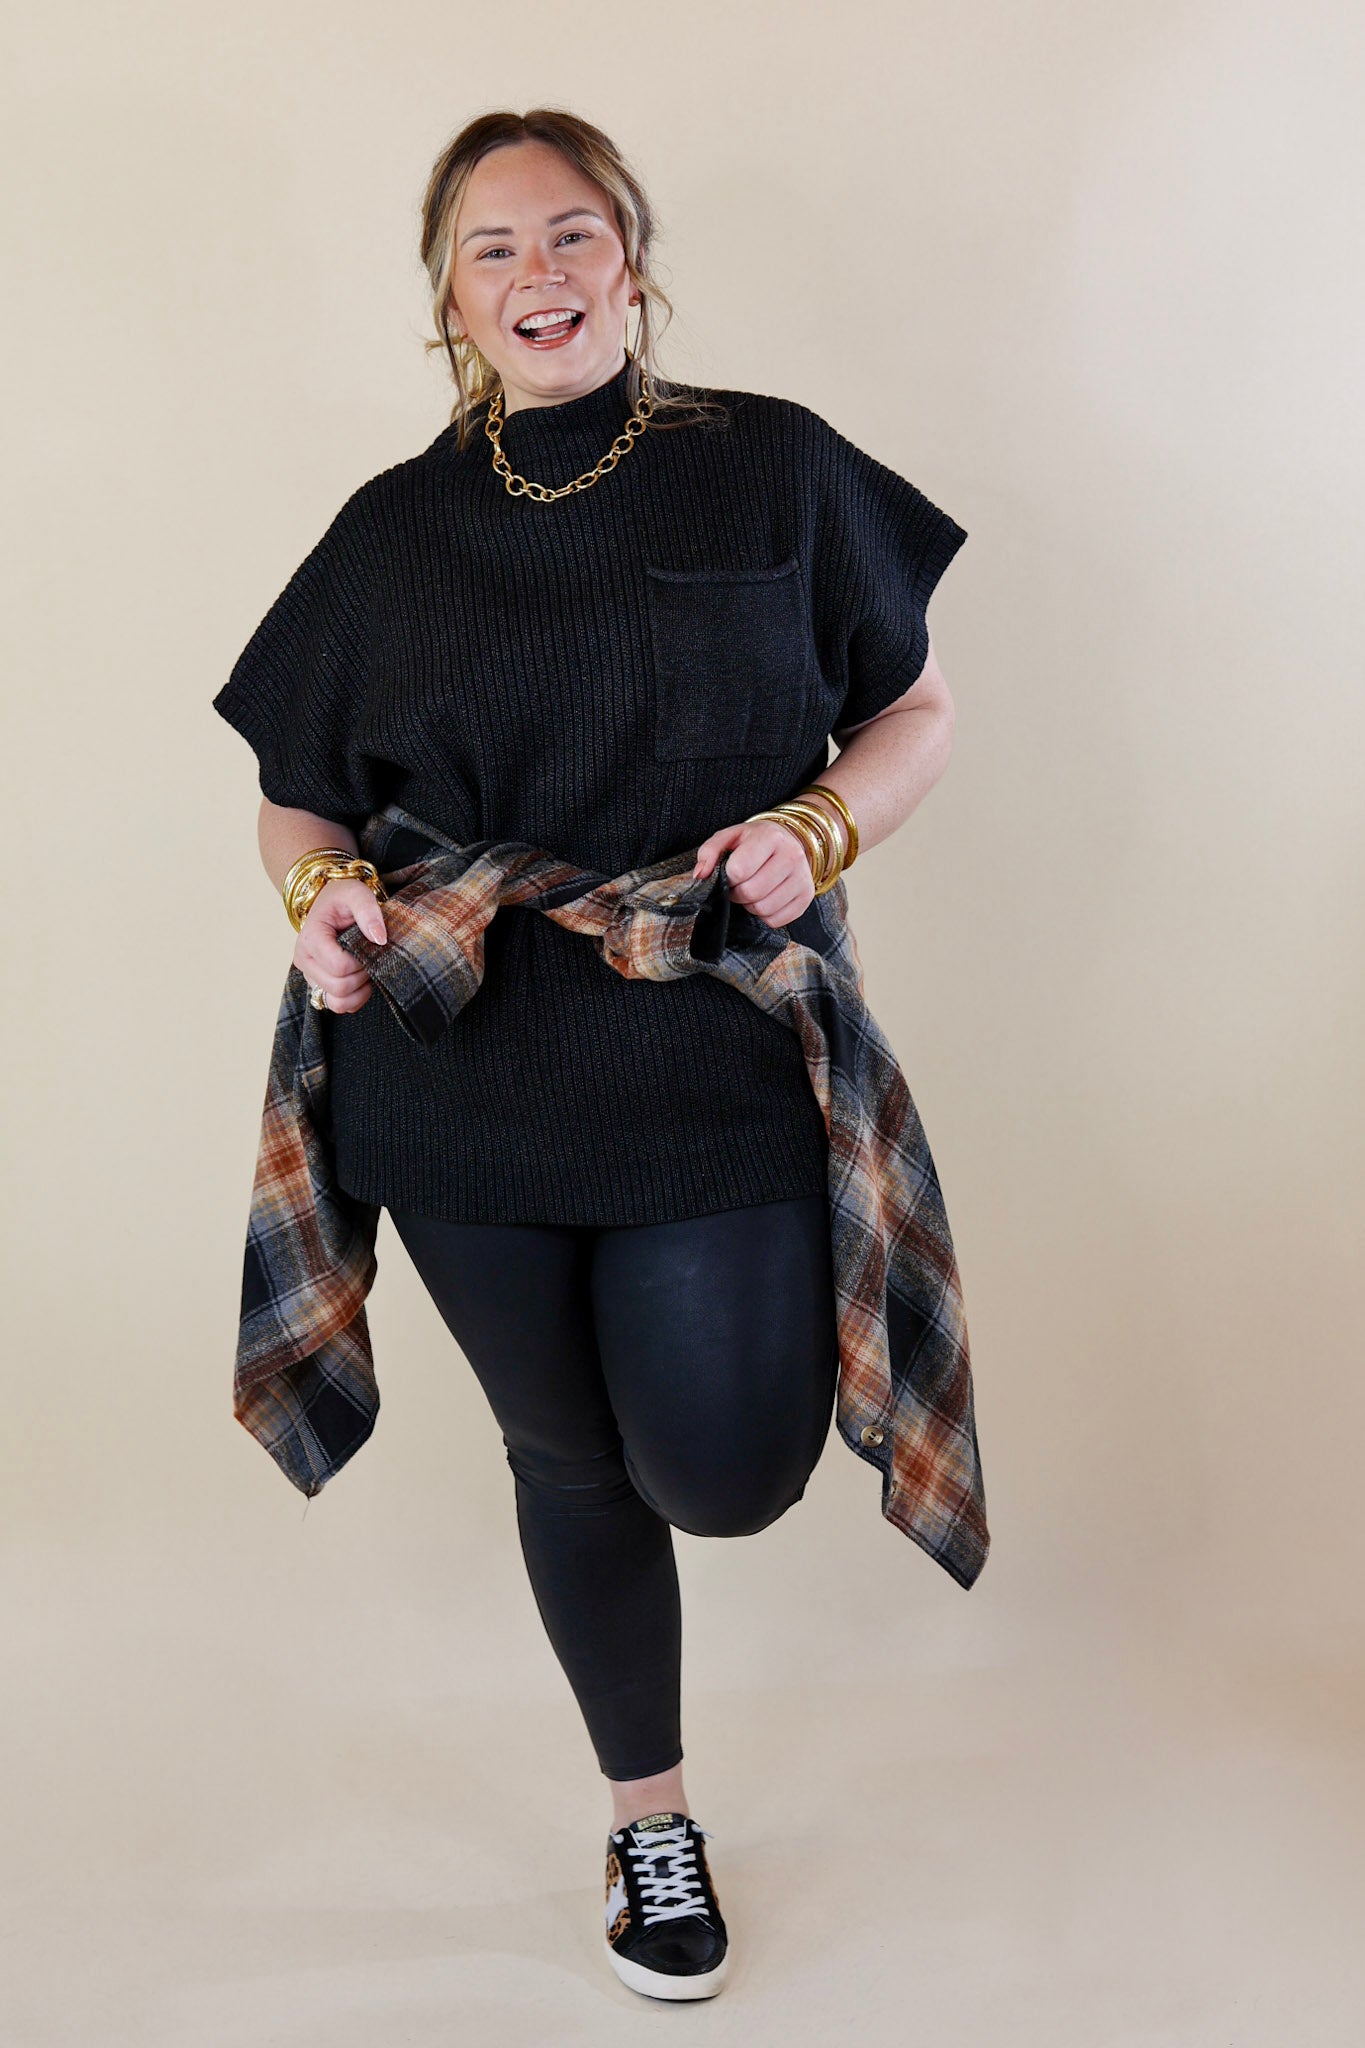 City Sights Cap Sleeve Sweater Top in Black - Giddy Up Glamour Boutique